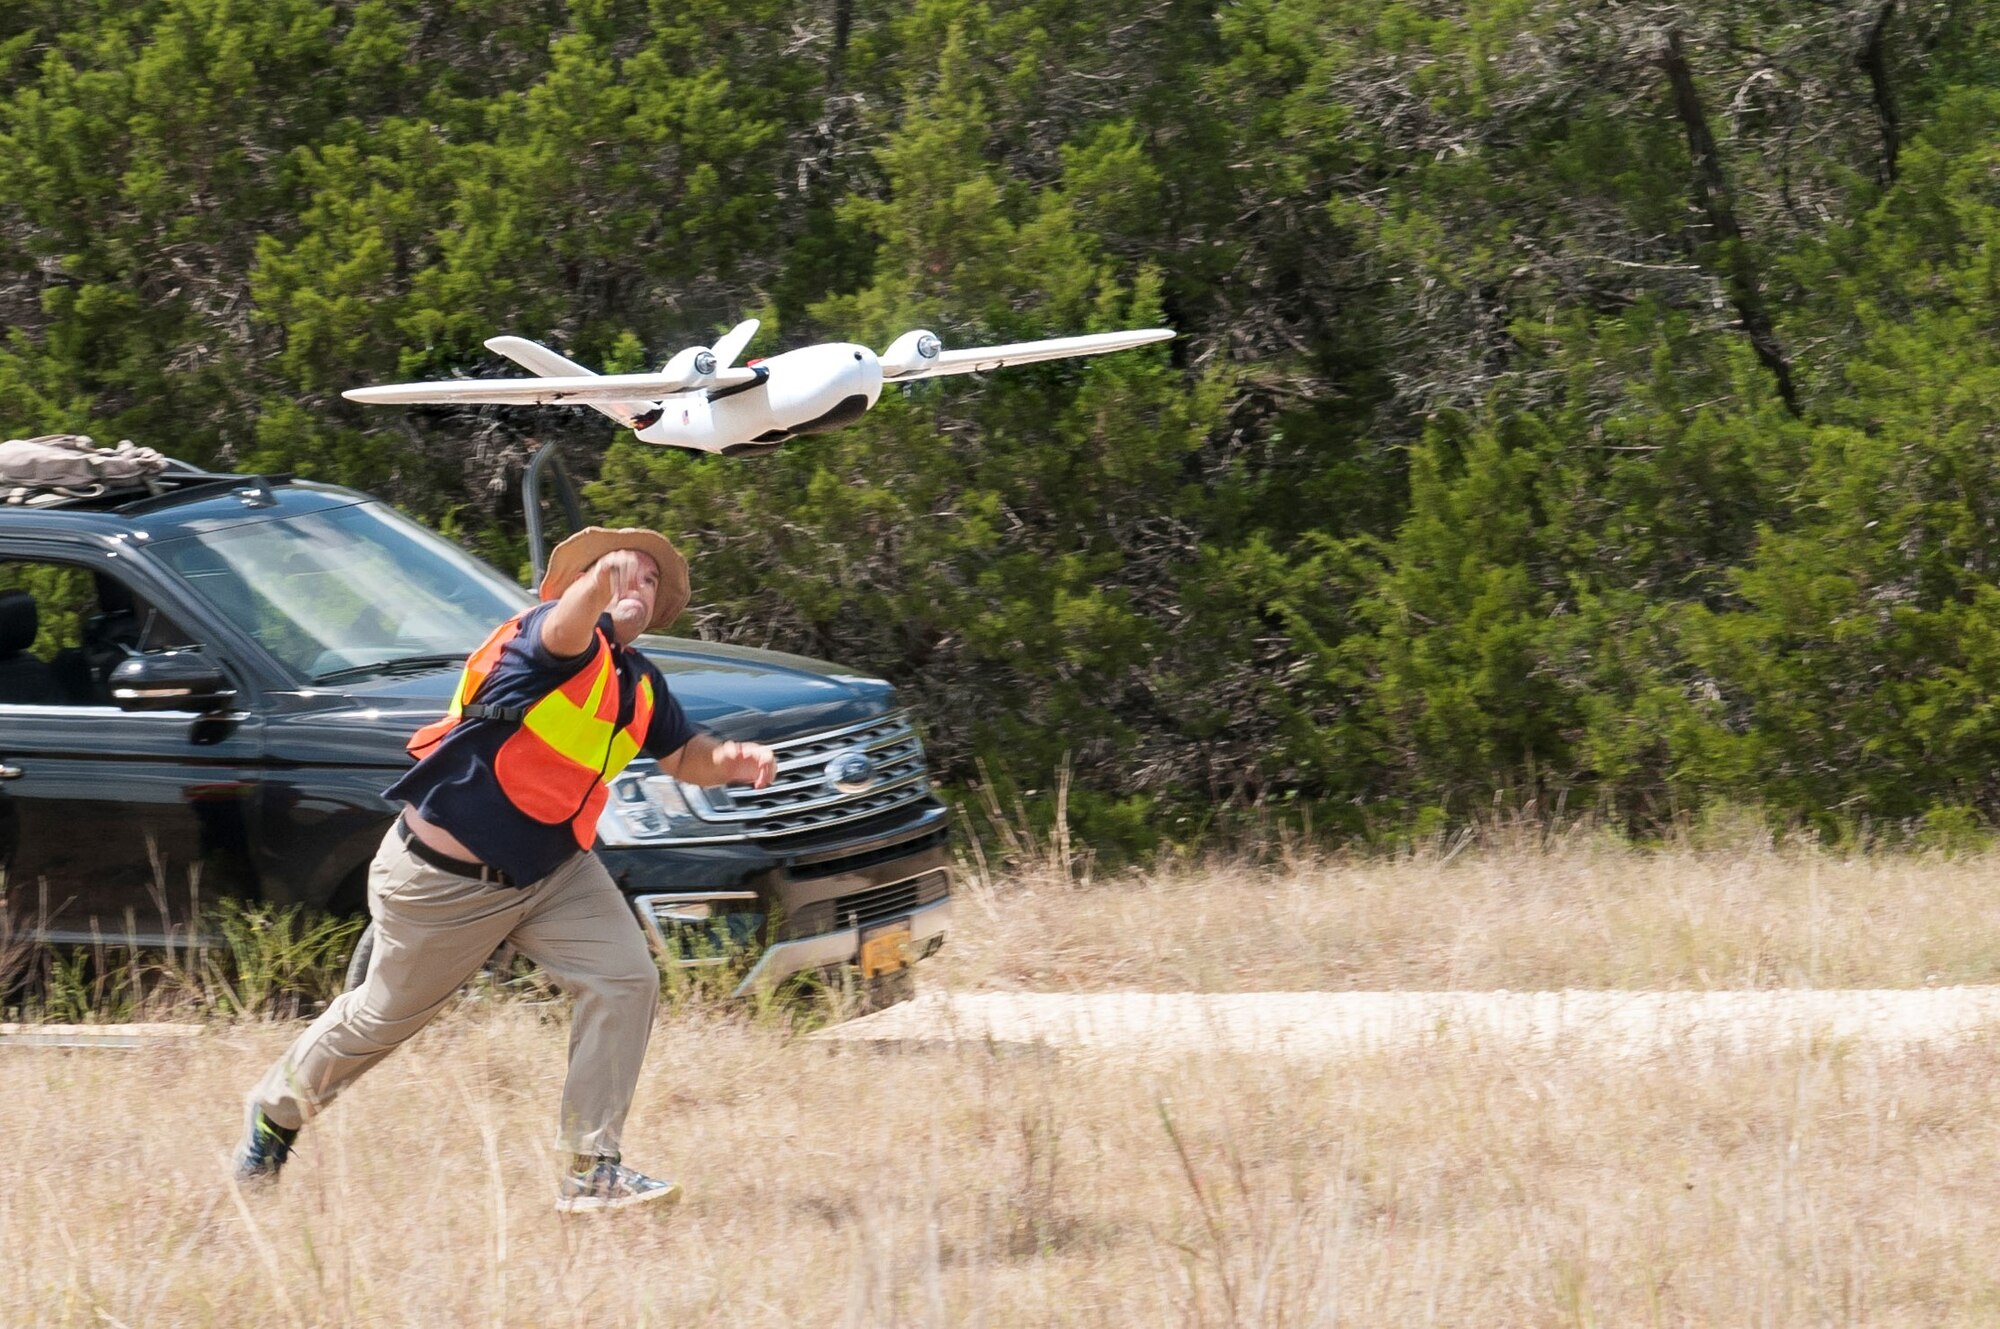 Ethan Jacobs, unmanned aerial system engineer, launches a UAS during a field test Sept. 4 at Camp Bullis, Texas. The UAS was equipped with Light Detection and Ranging, multi-spectral sensors and machine-learning algorithms to map, survey and inventory habitat for the golden-cheeked warbler. The field test will help the Air Force determine if UAS technology can characterize habitat better, faster and cheaper than current methods.